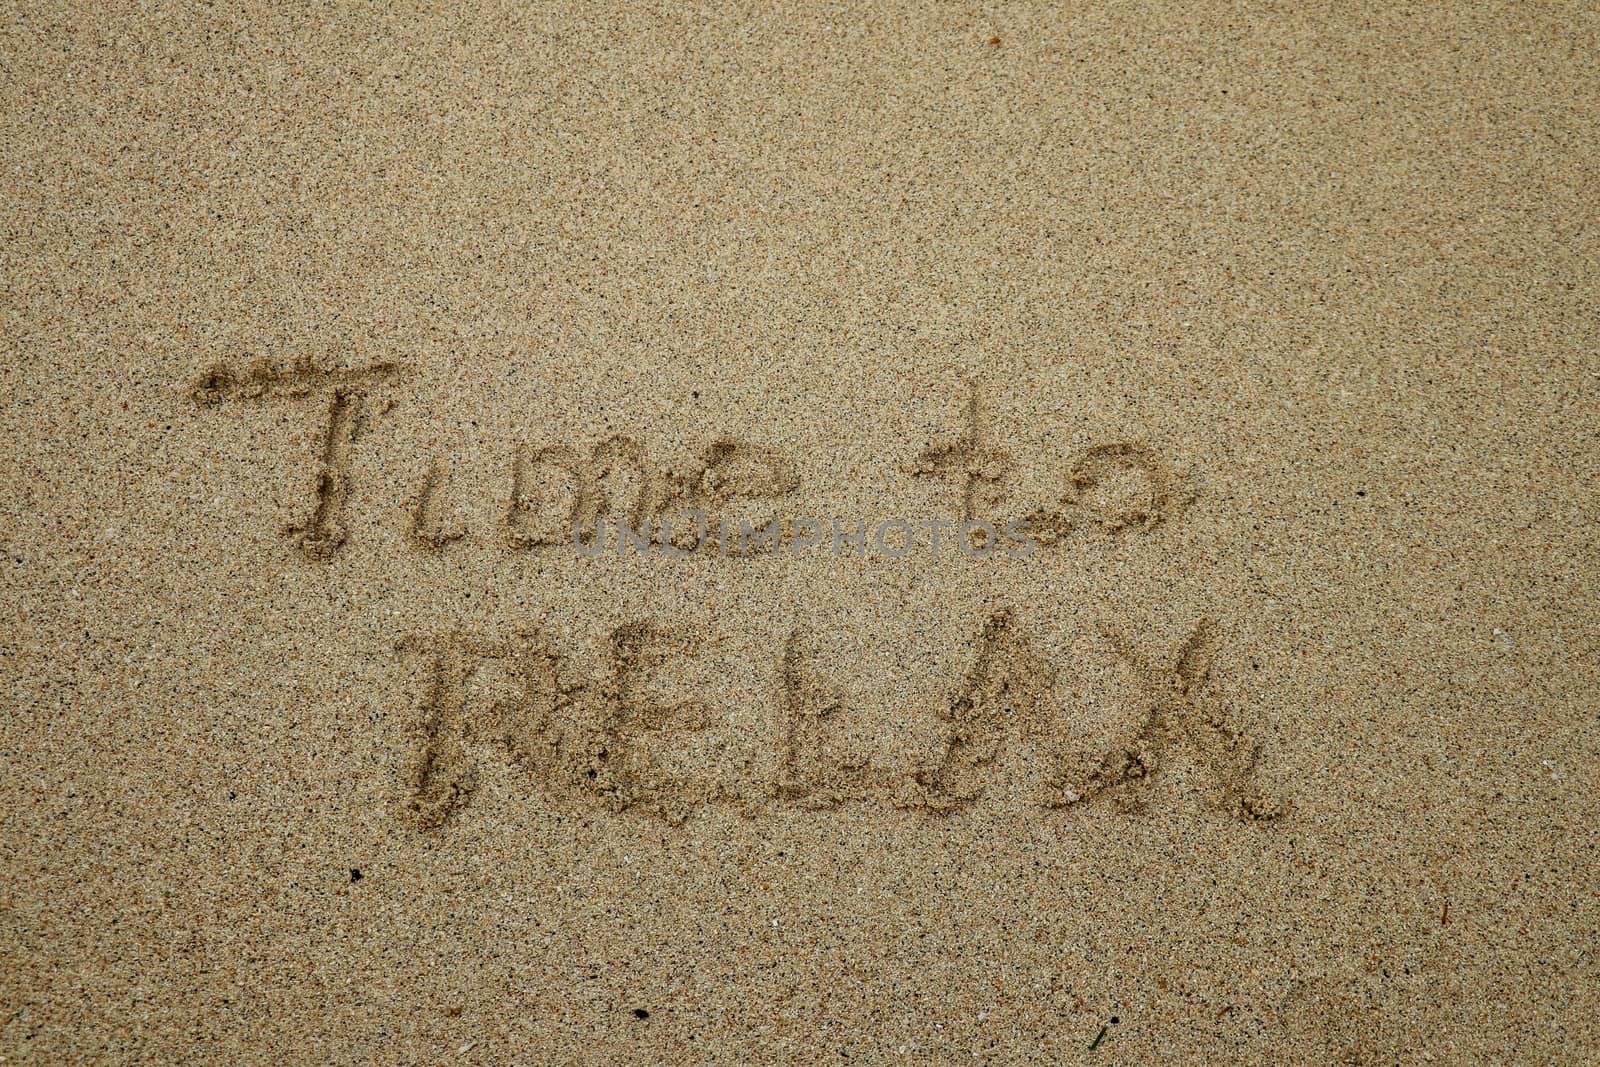 time to relax, concept written on sandy beach.